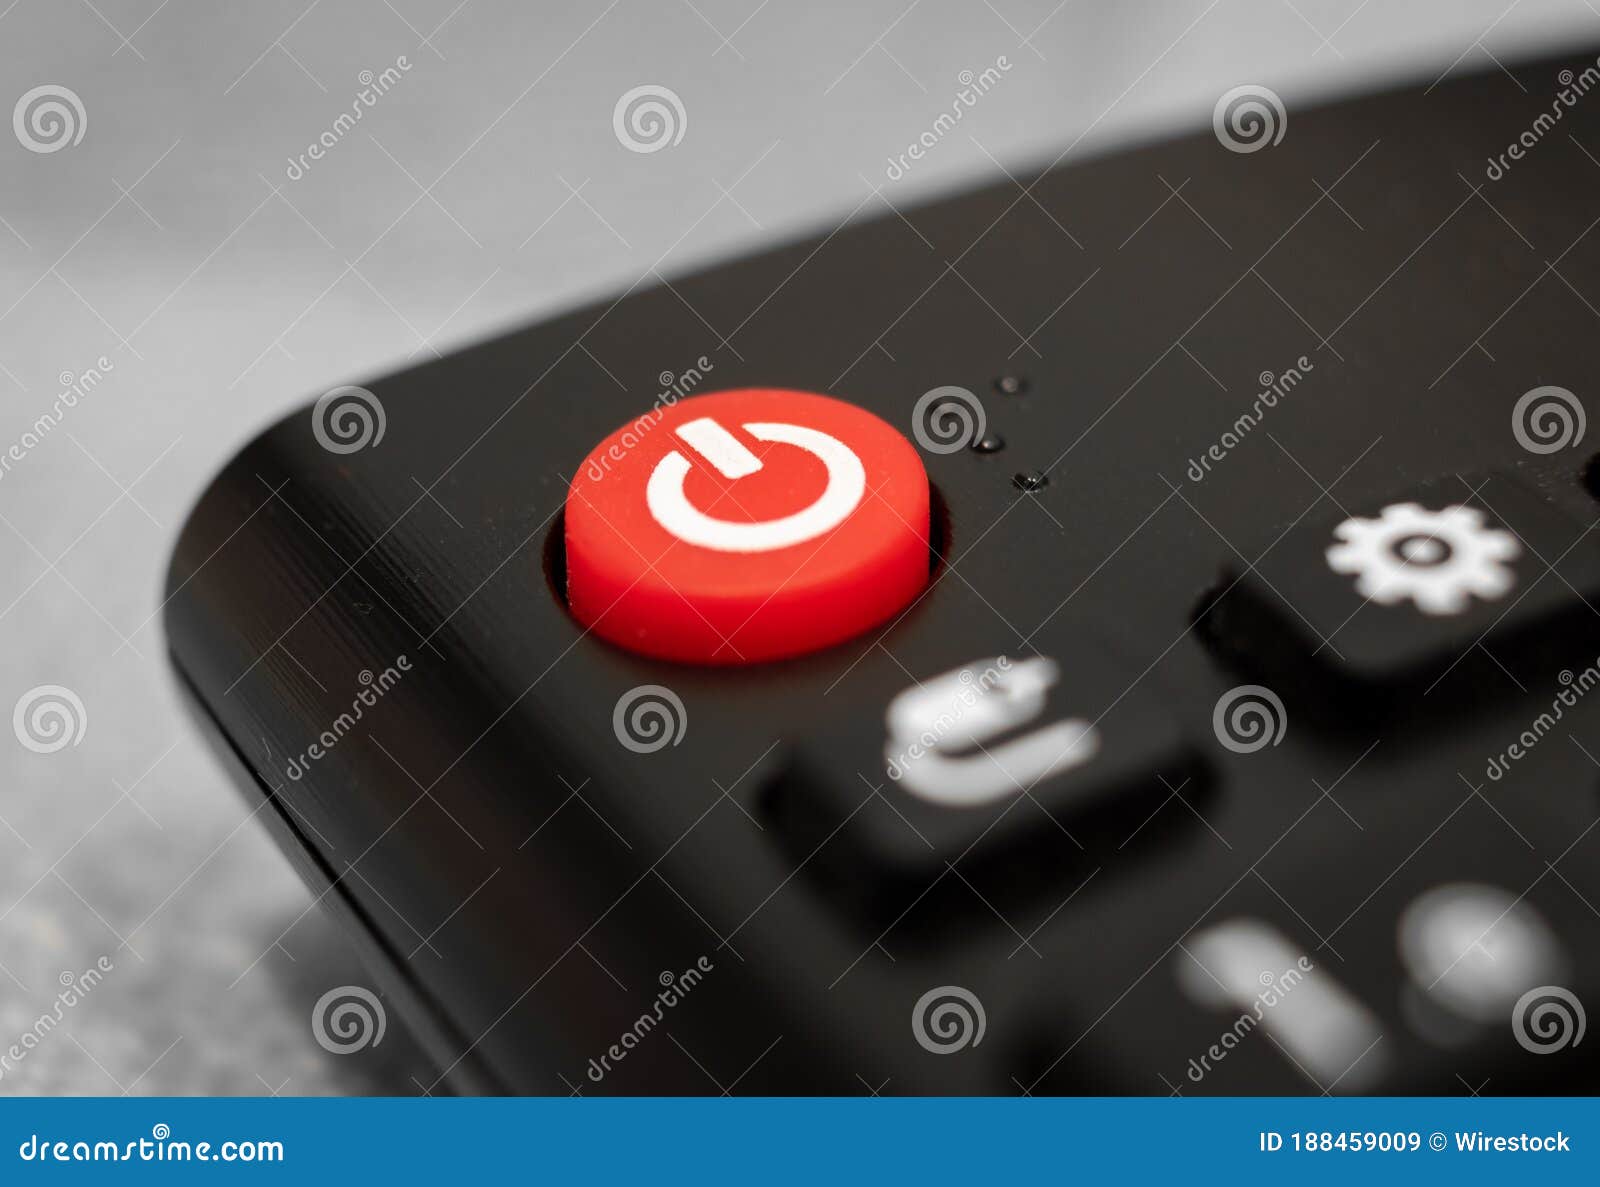 Closeup of the Red Turn Off Button on a Remote Control Under the Lights  Stock Image - Image of technology, multimedia: 188459009